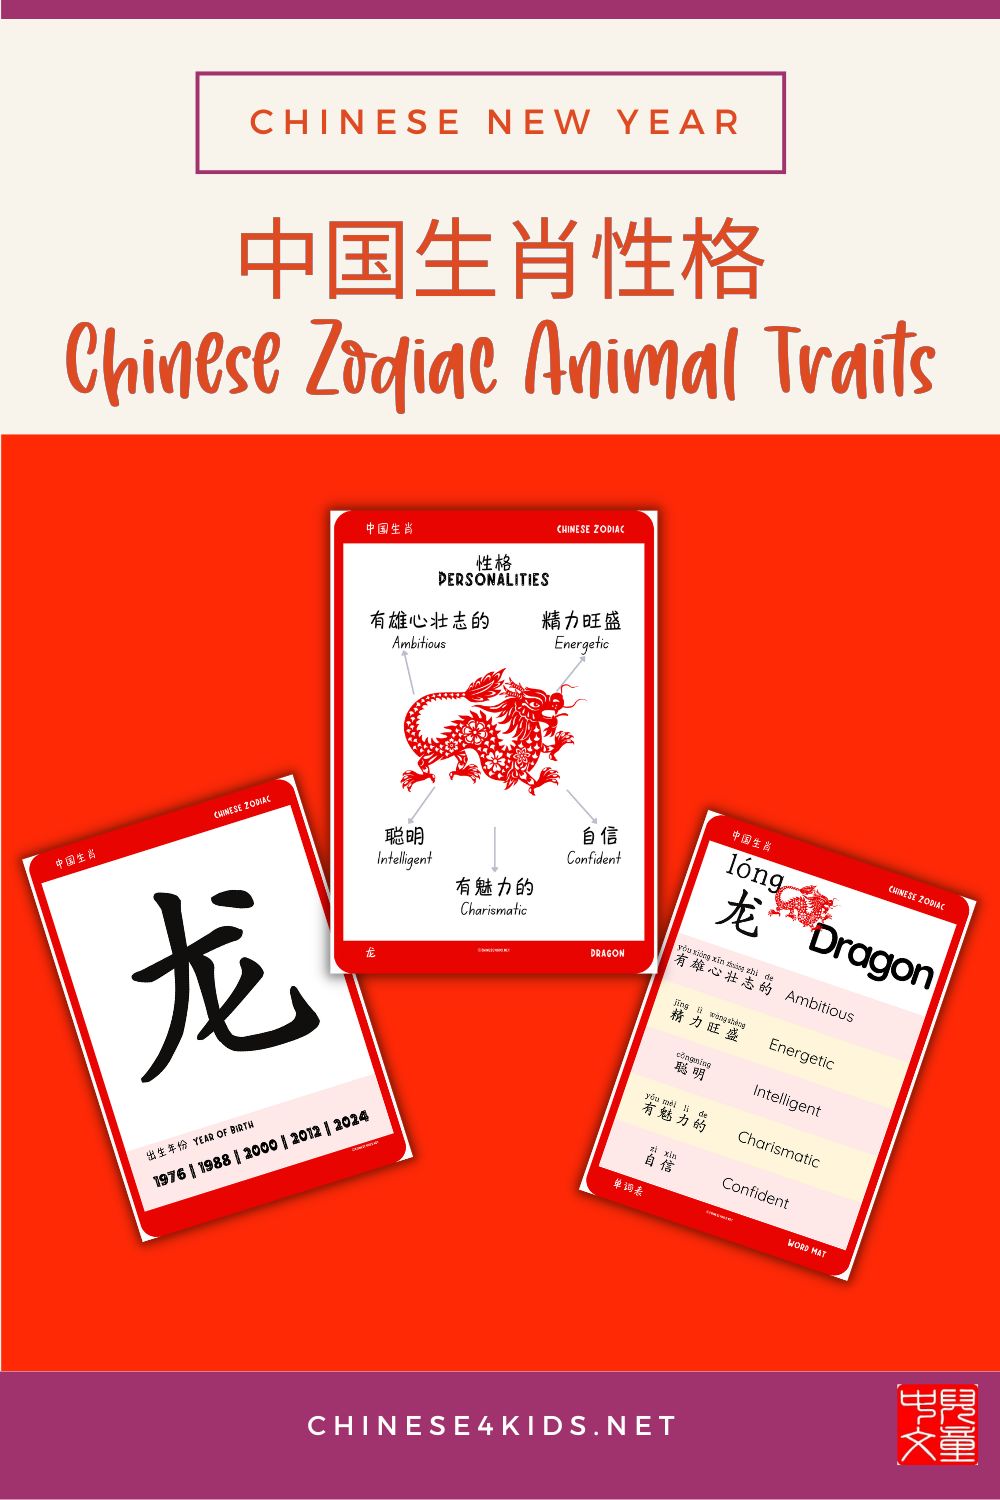 Chinese zodiac animal traits and personalities for the people who are born in the zodiac year. #Chinesezodiac #zodiacpersonality #zodiactraits #Chineseculture #Chineselanguage